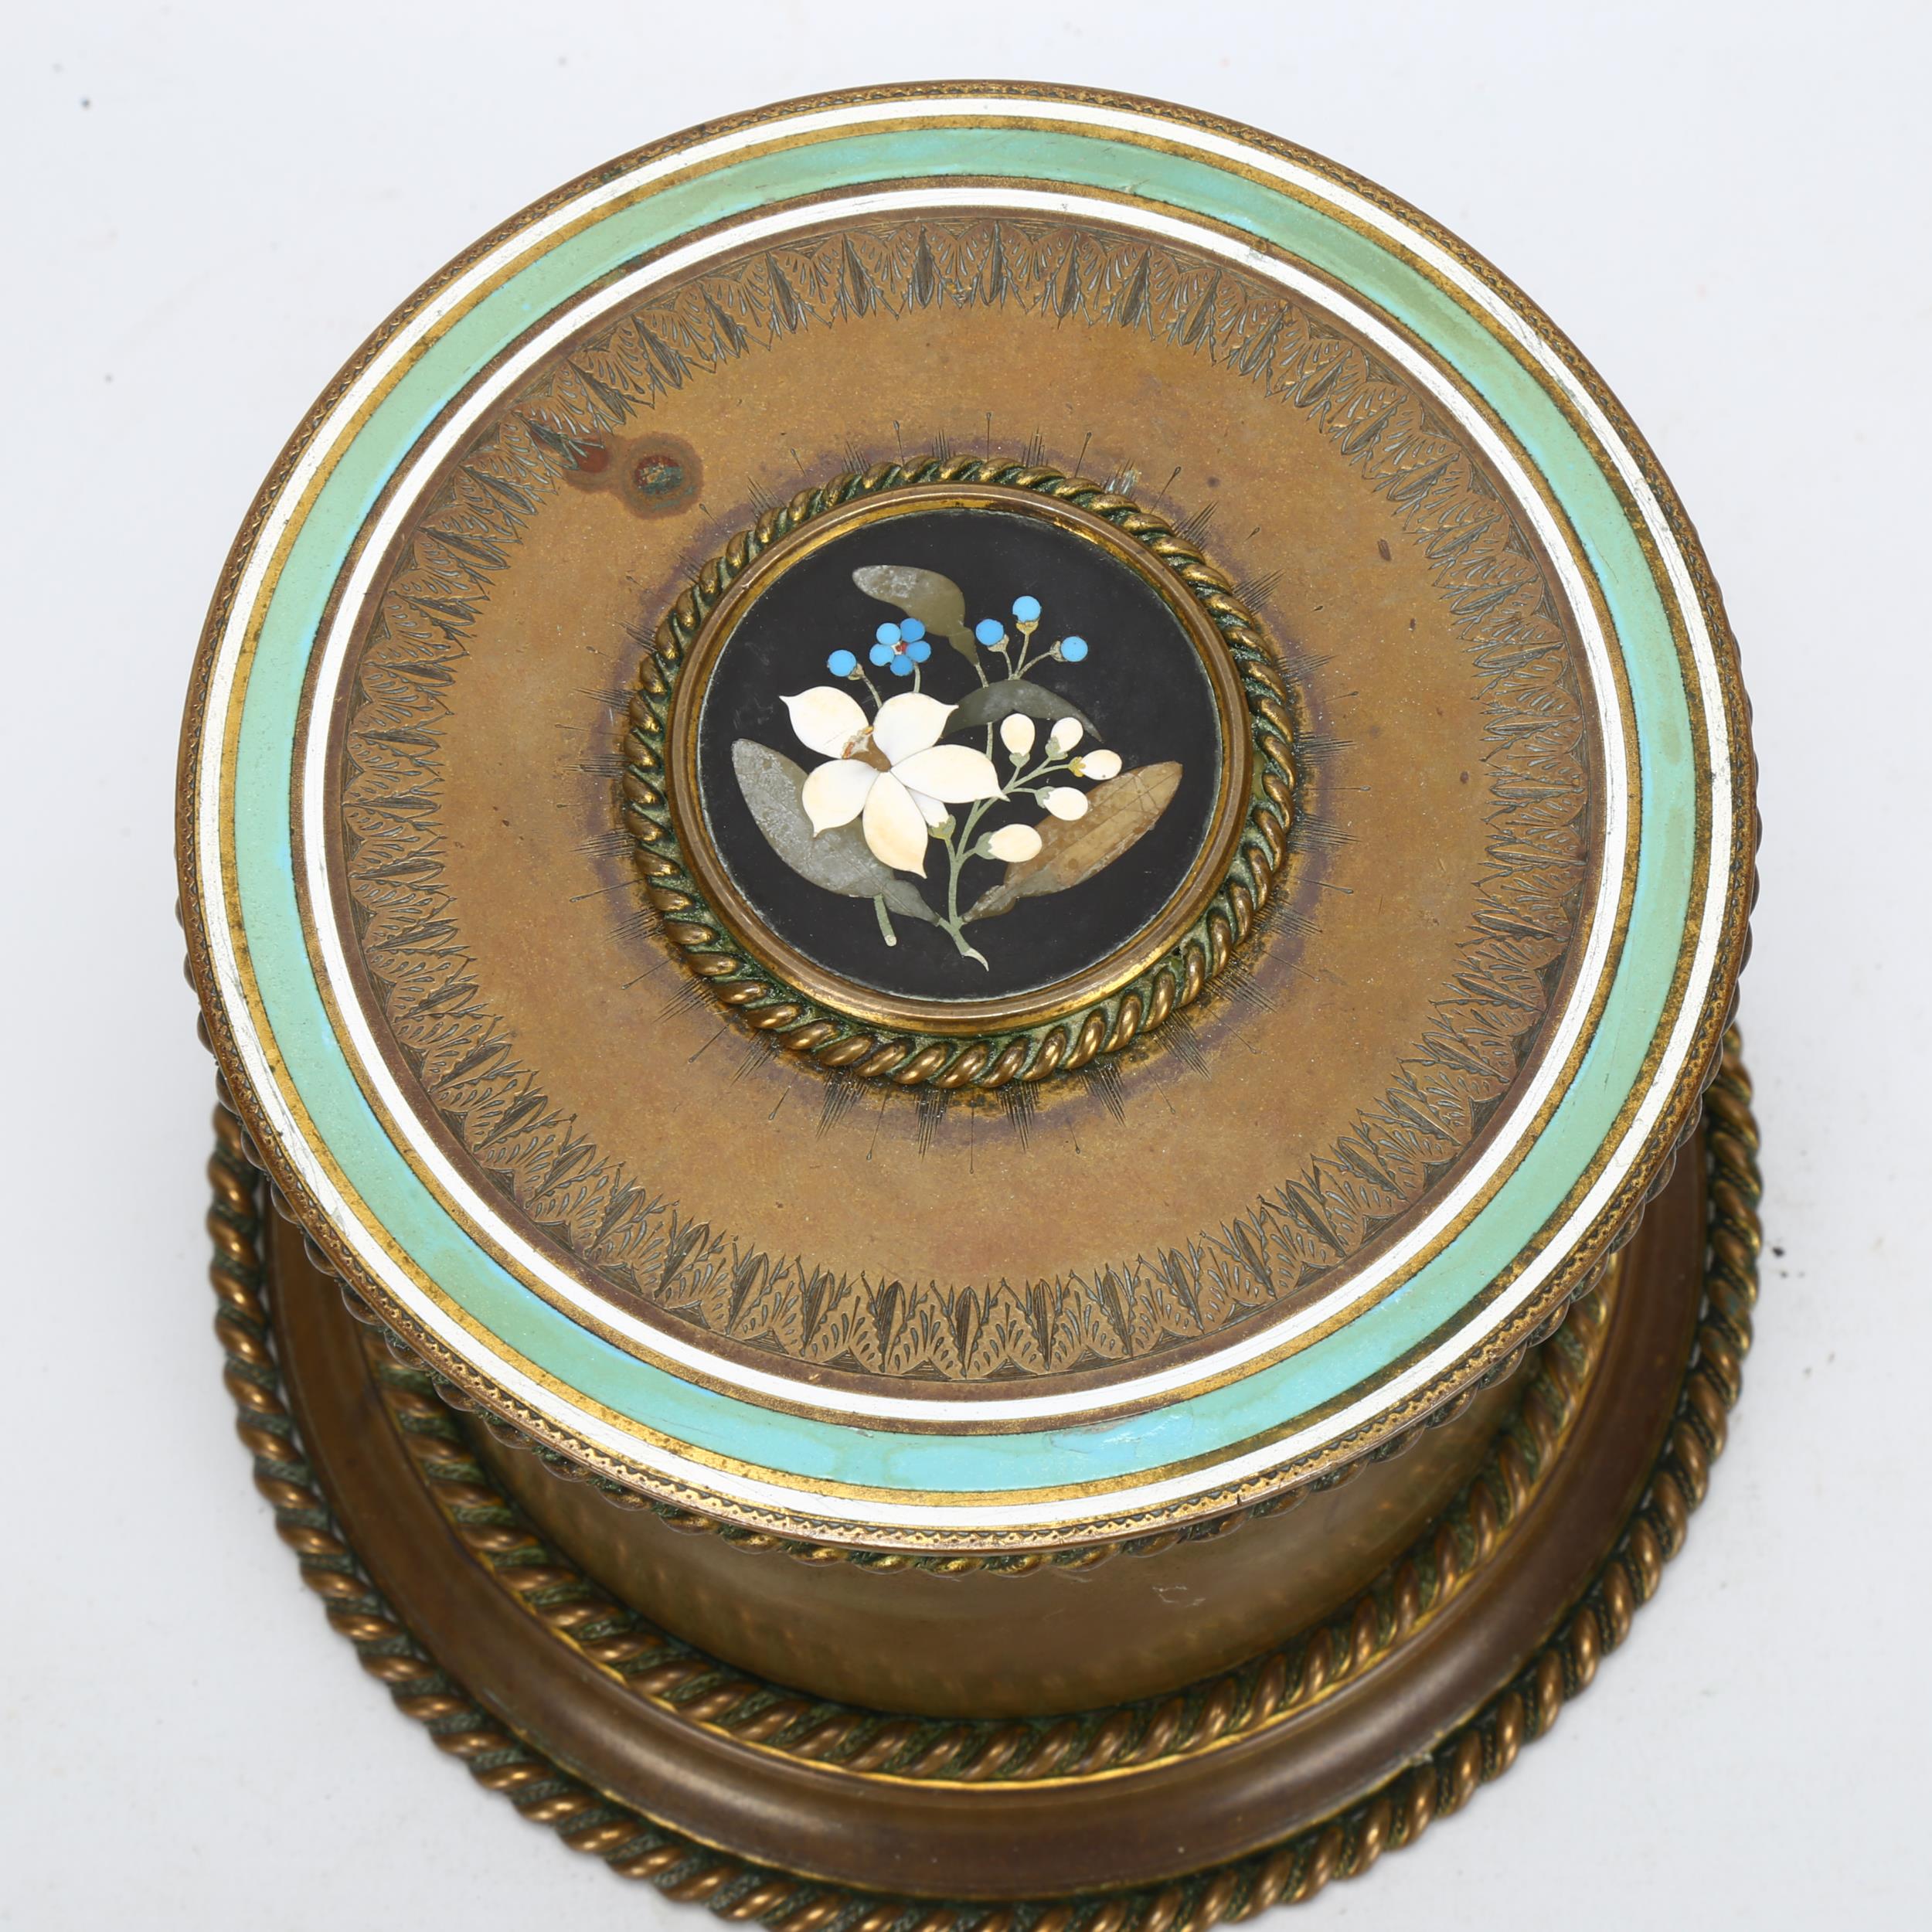 A French Napoleon III gilt-bronze Pietra Dura and enamel tobacco jar, cylindrical form with inset - Image 2 of 3